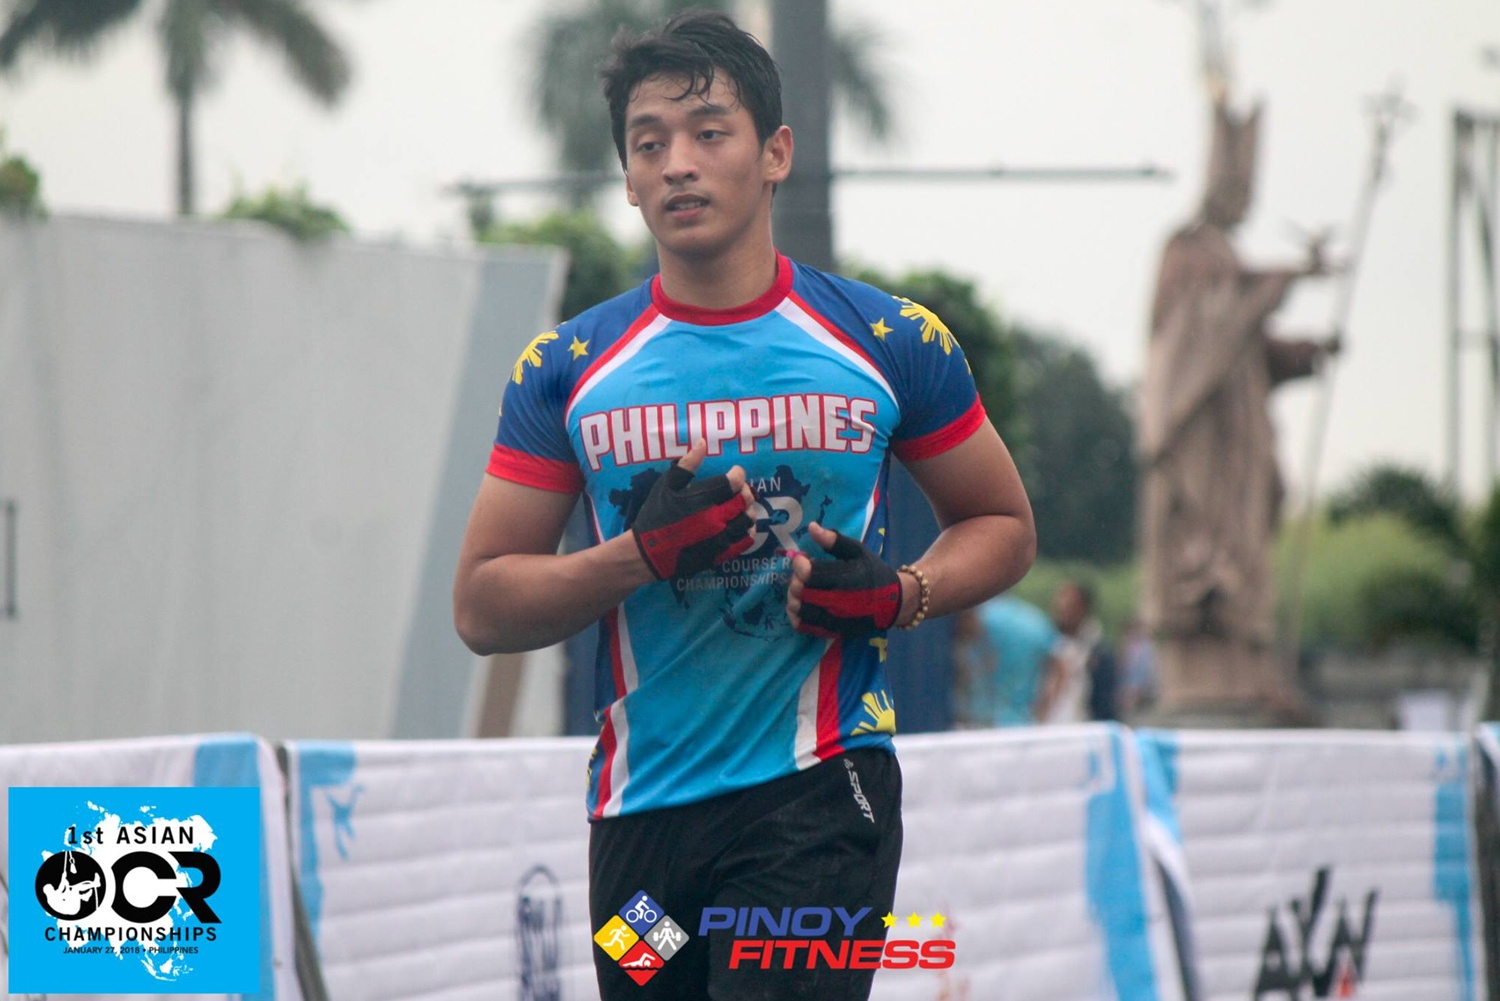 Obstacle Course Race in the Philippines - 1st Asian OCR championship